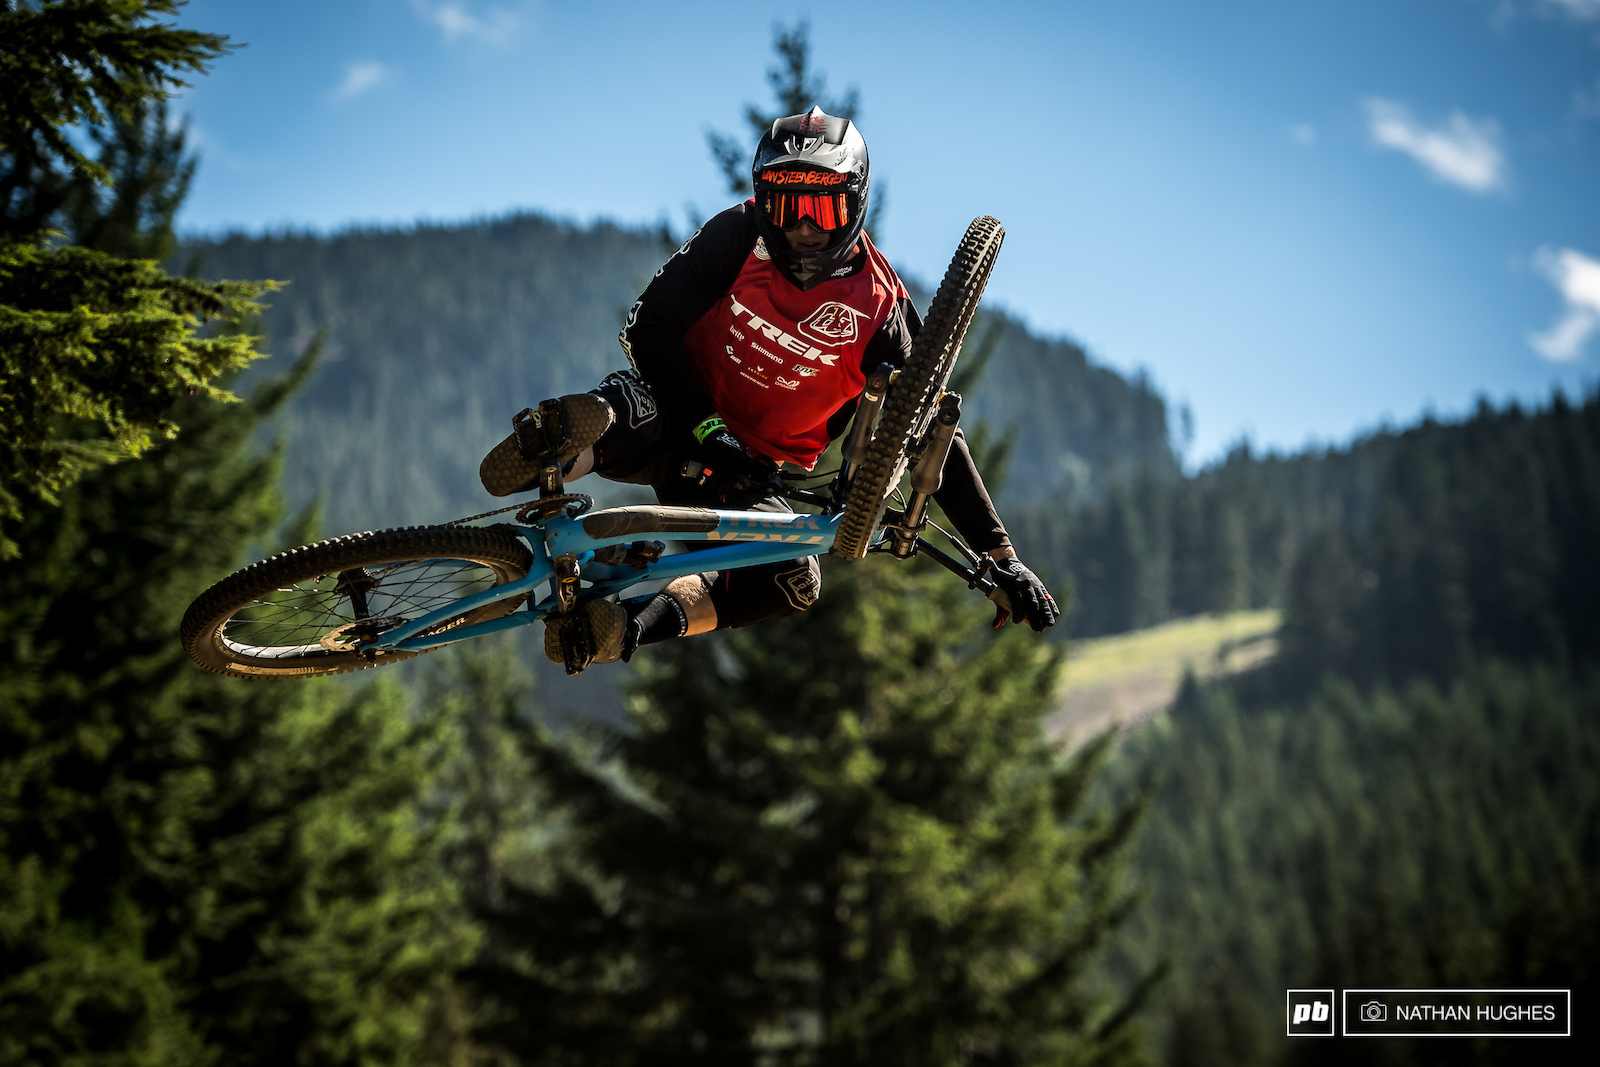 Always a struggle for Tom Van Steenbergen not to go inverted when airborn...